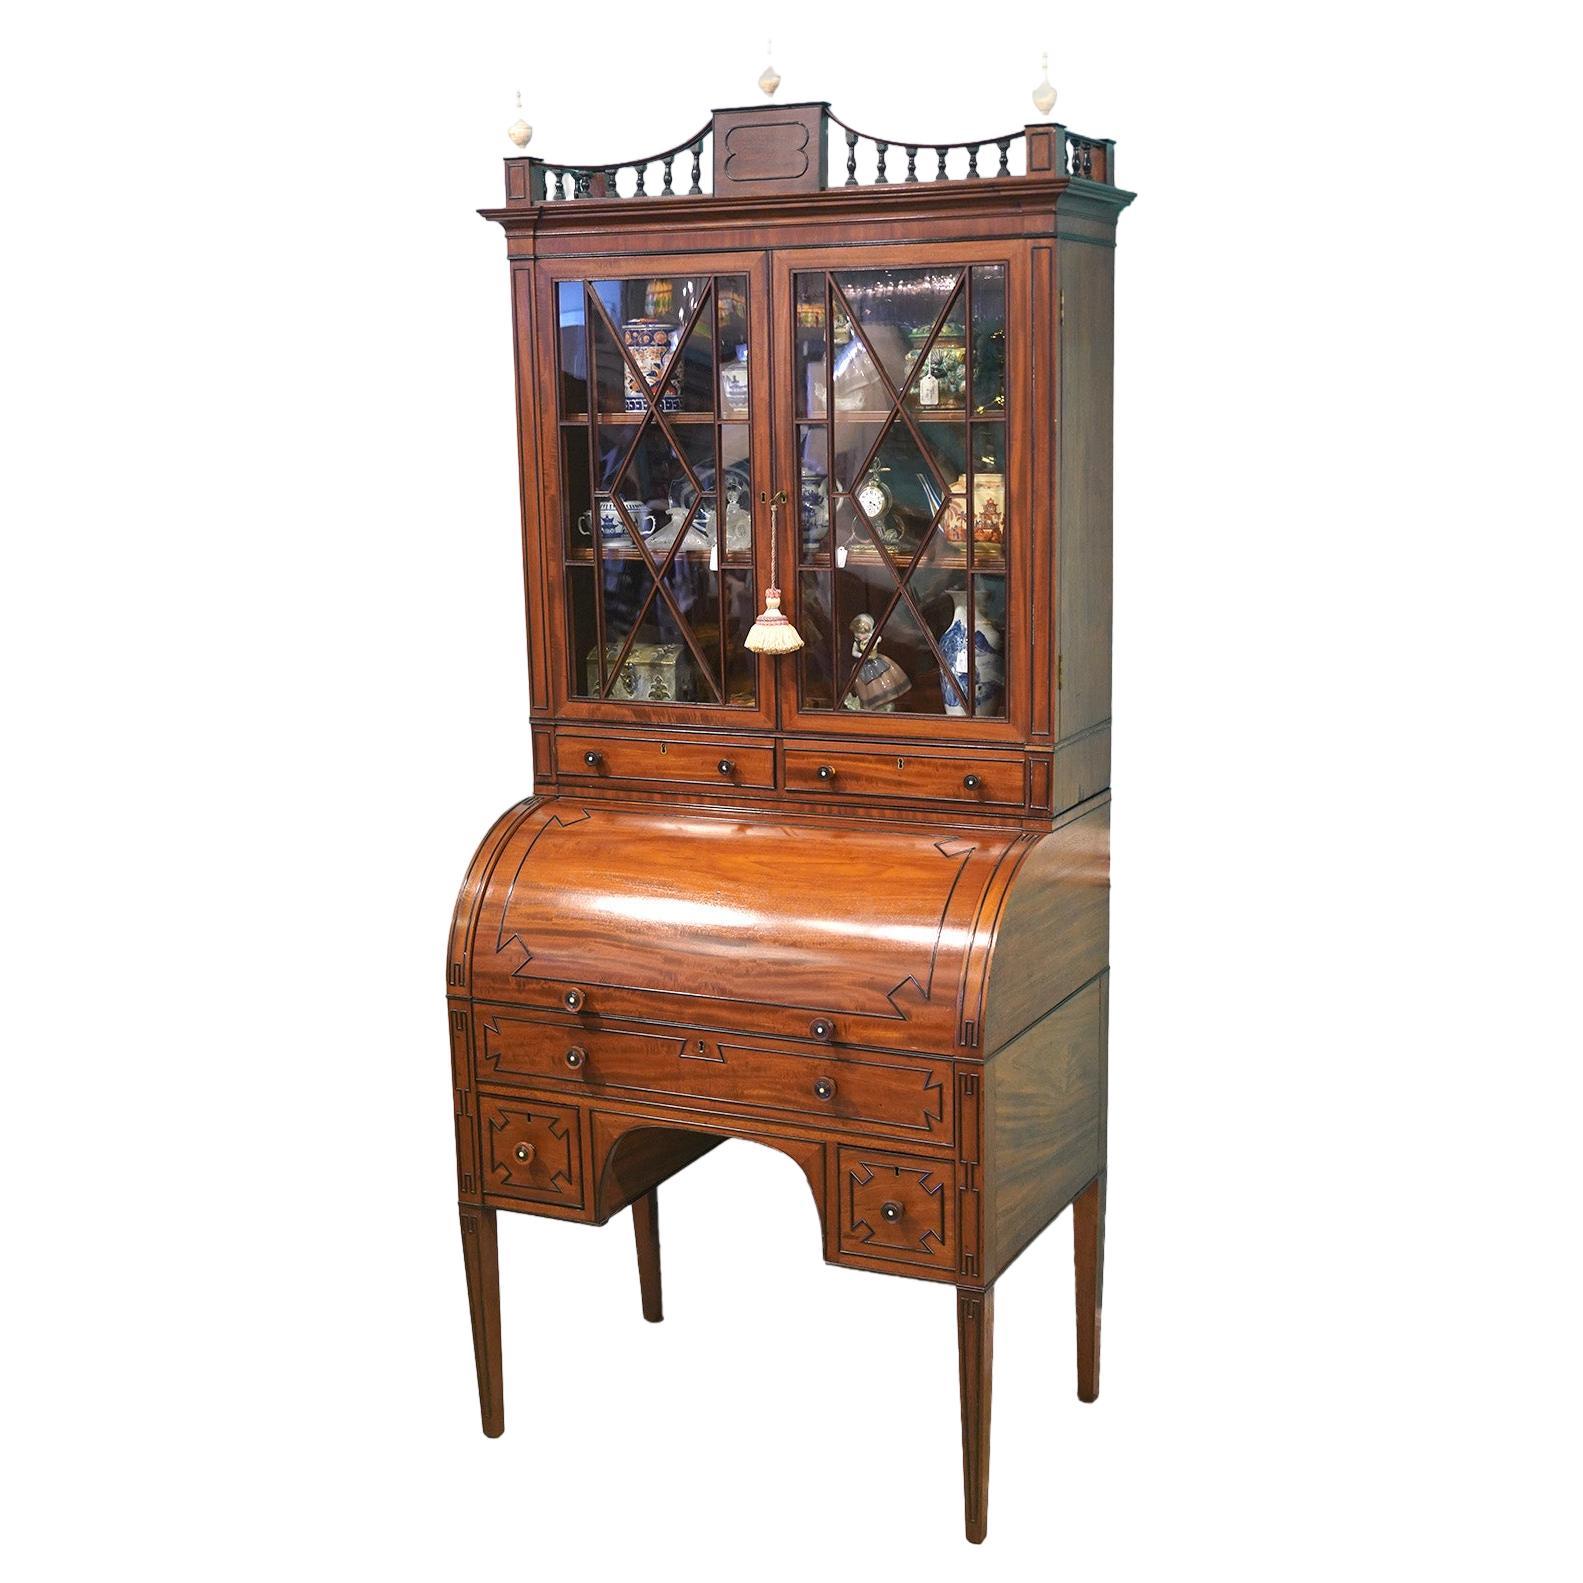 19th Ct. English Regency Mahogany Bookcase / Desk with Fitted Interior